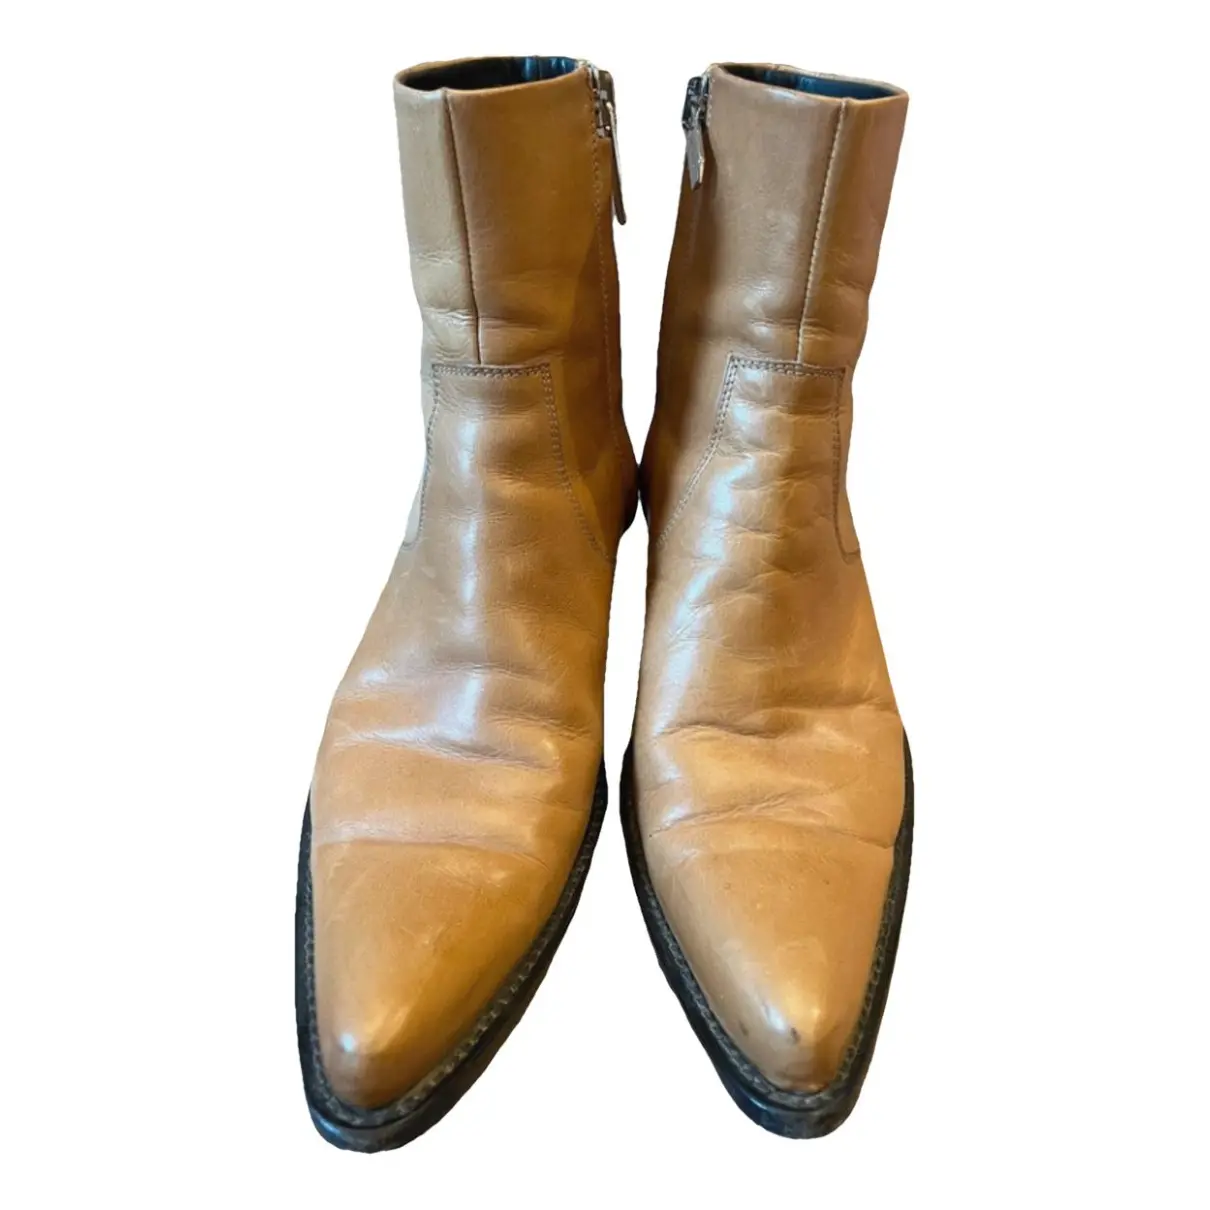 CALVIN KLEIN 205W39NYC SPAZZOLATO LEATHER COWBOY BOOTS SHOES $1400 Price  Cut!!